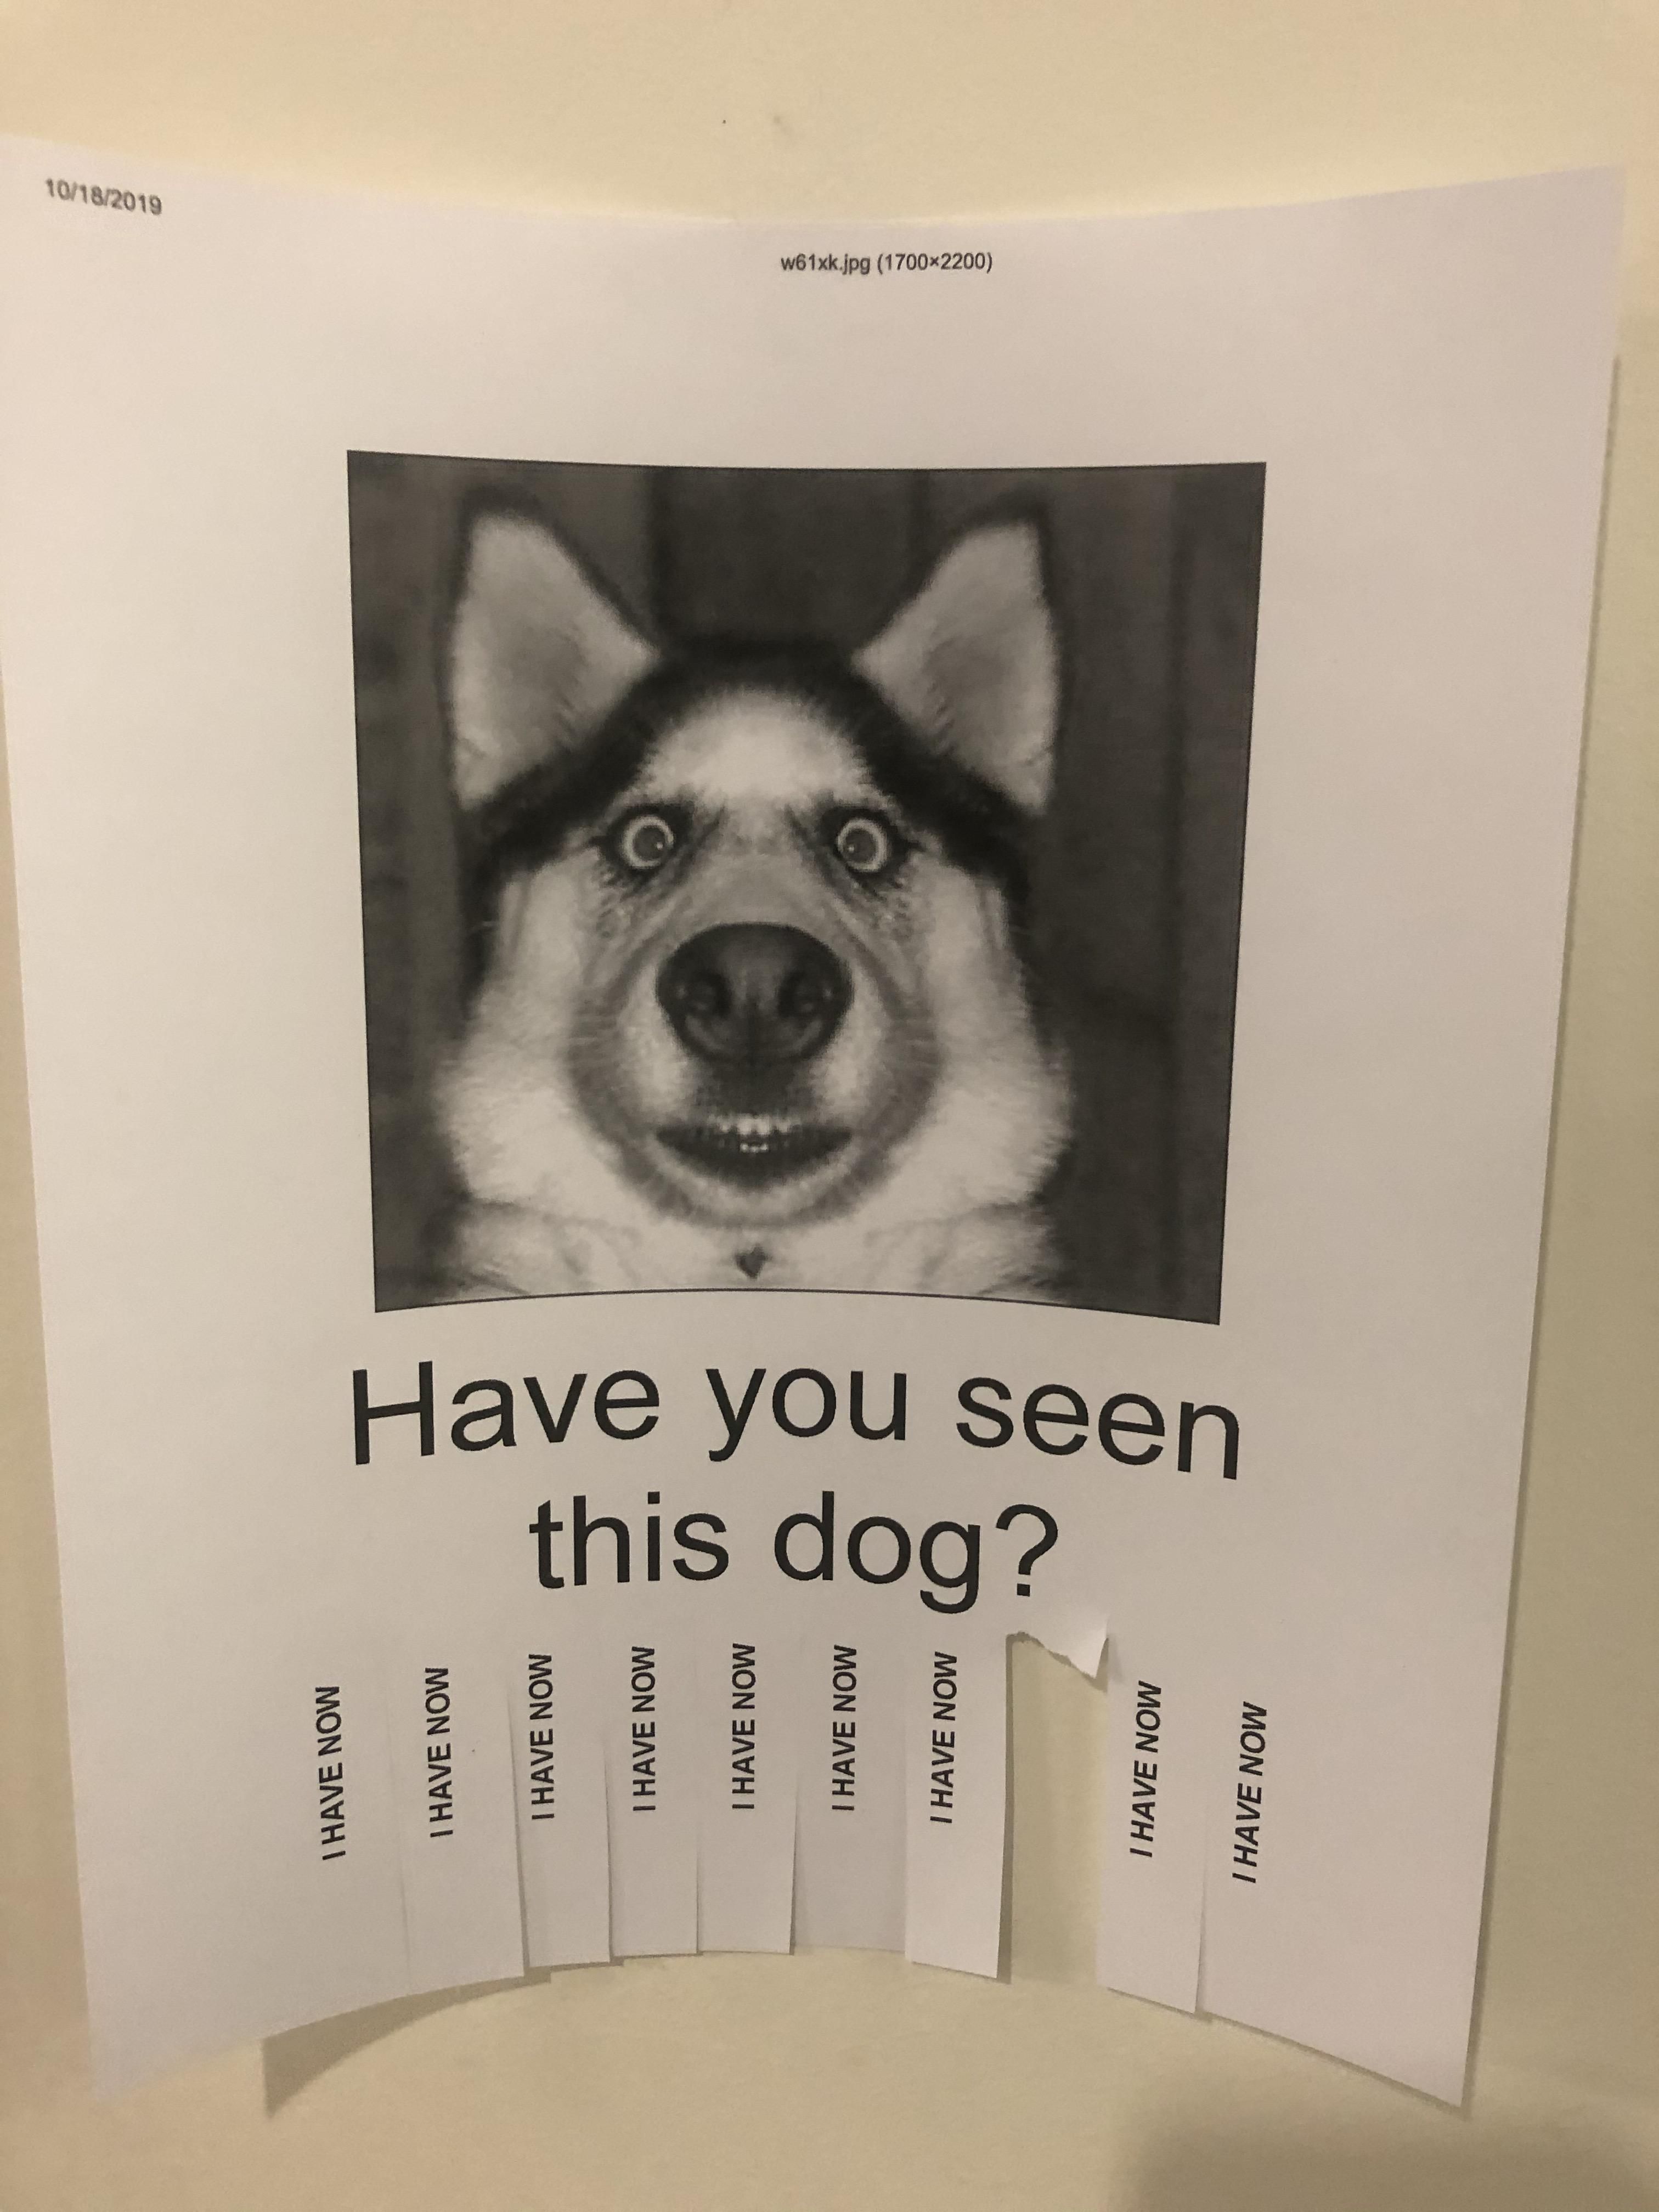 This was hanging on a wall at my office